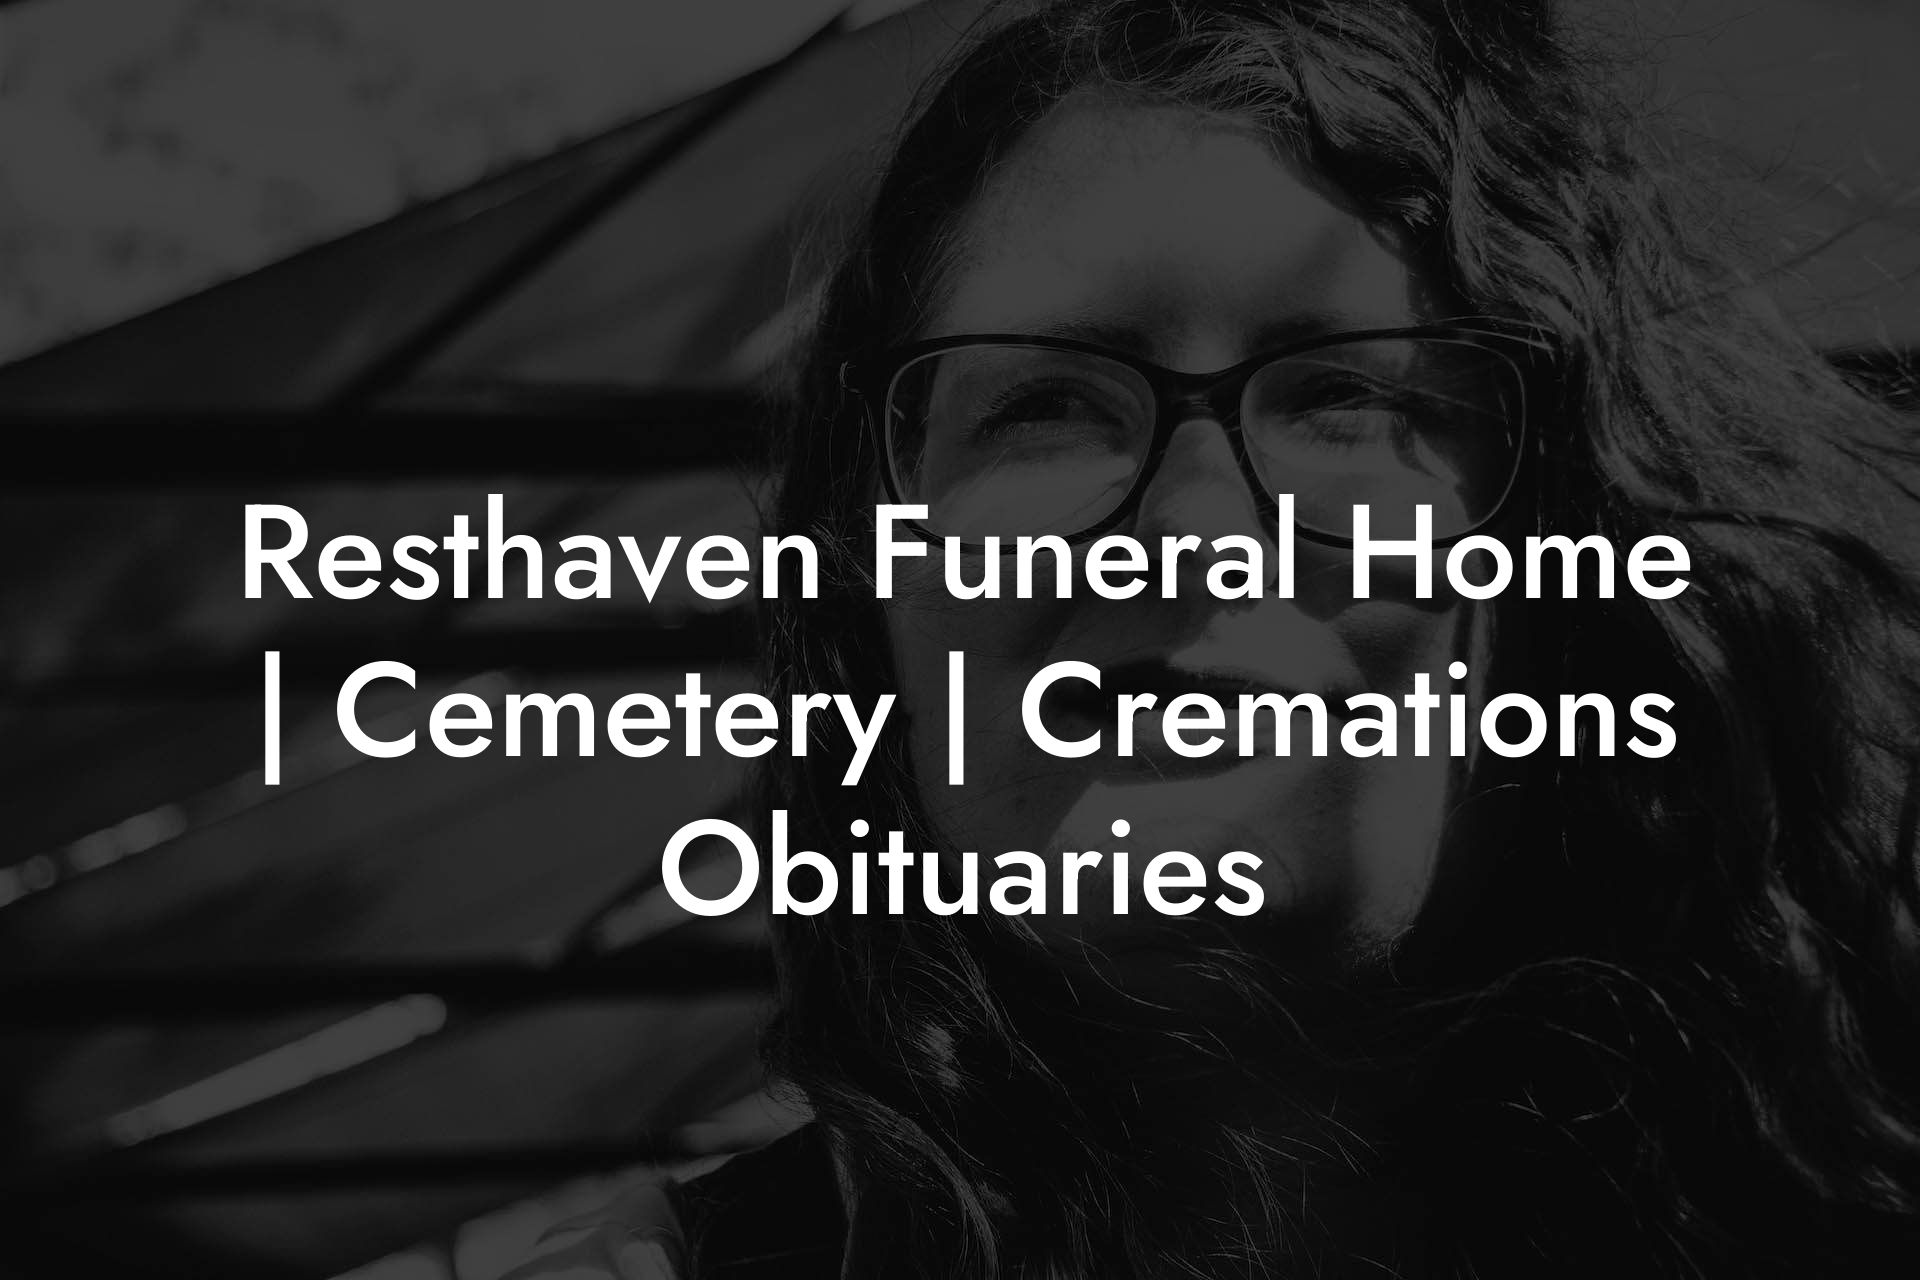 Resthaven Funeral Home | Cemetery | Cremations Obituaries